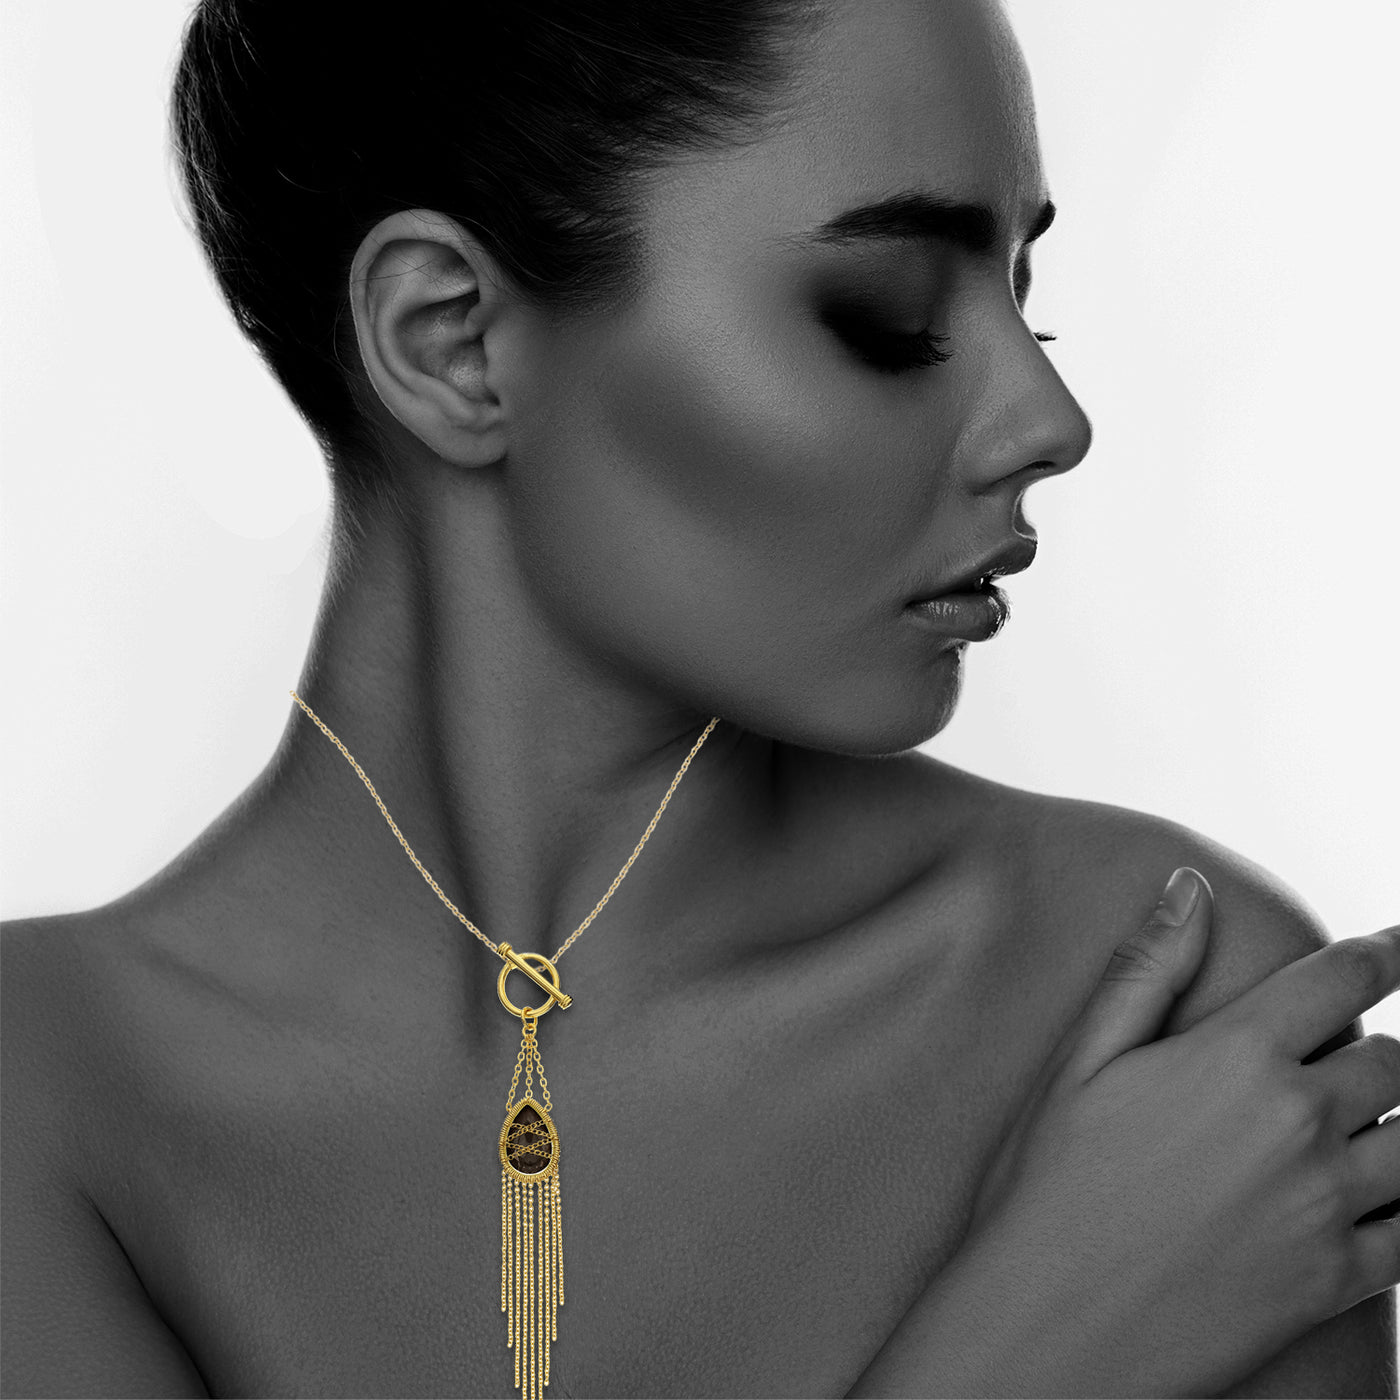 Gold Plated Sterling Silver Hand Wrapped Drape Chain Toggle Hanging Teardrop Smoky Quartz Stone Pendant Necklace